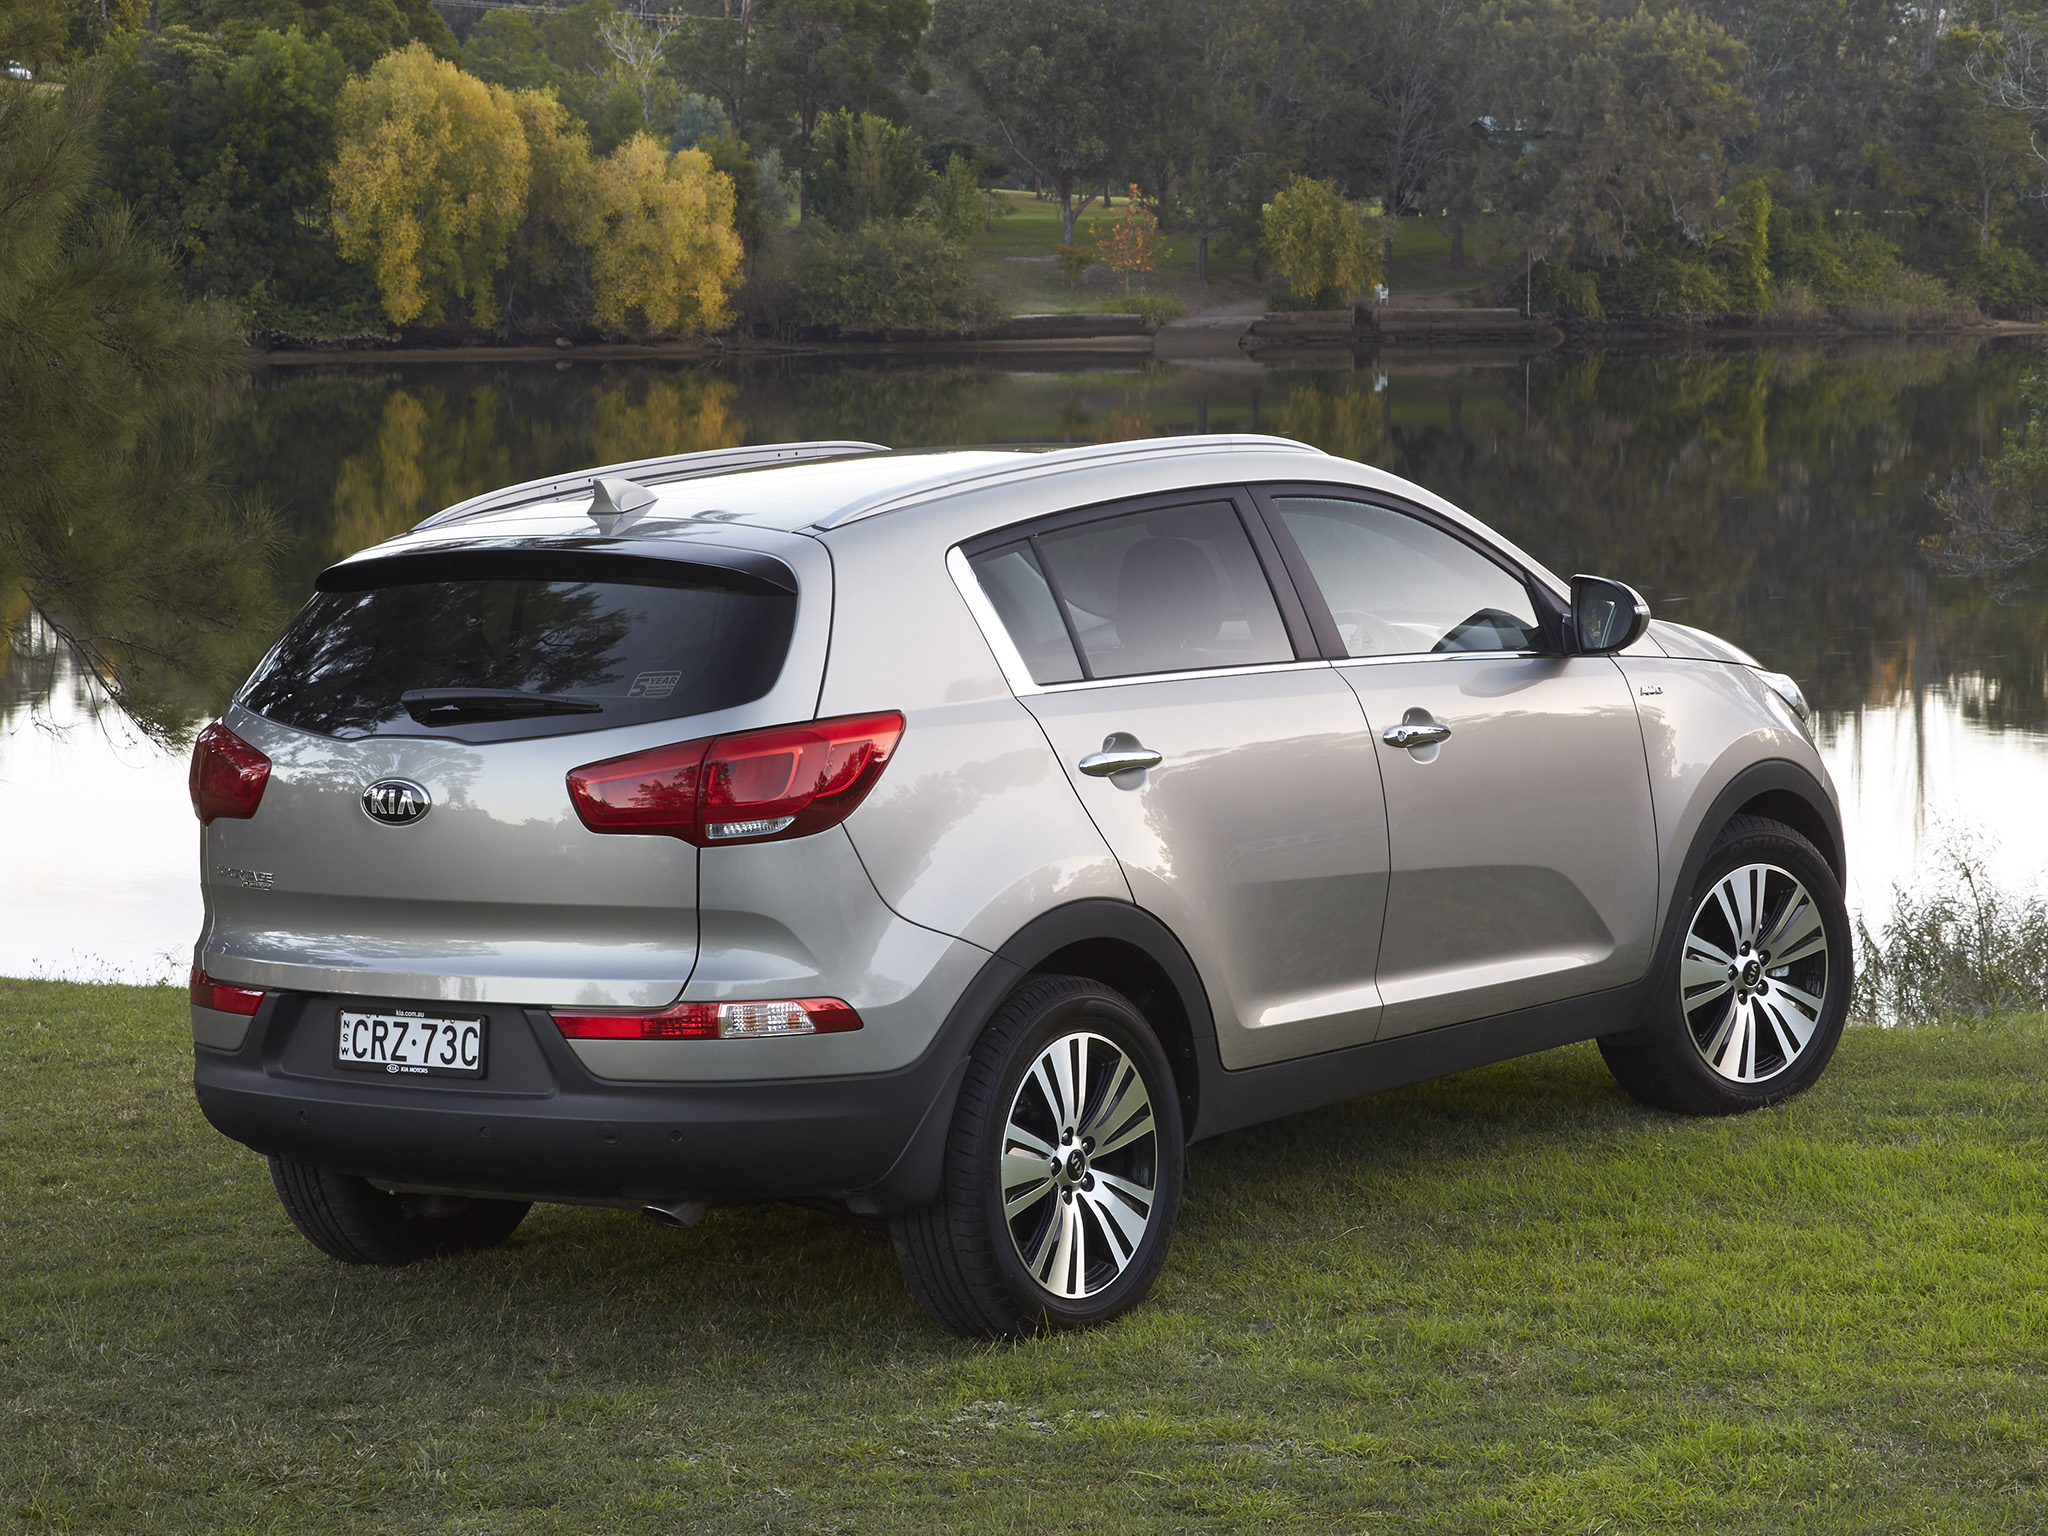 Kia Sportage SUV Gets New Facelift with Sorento Looks for